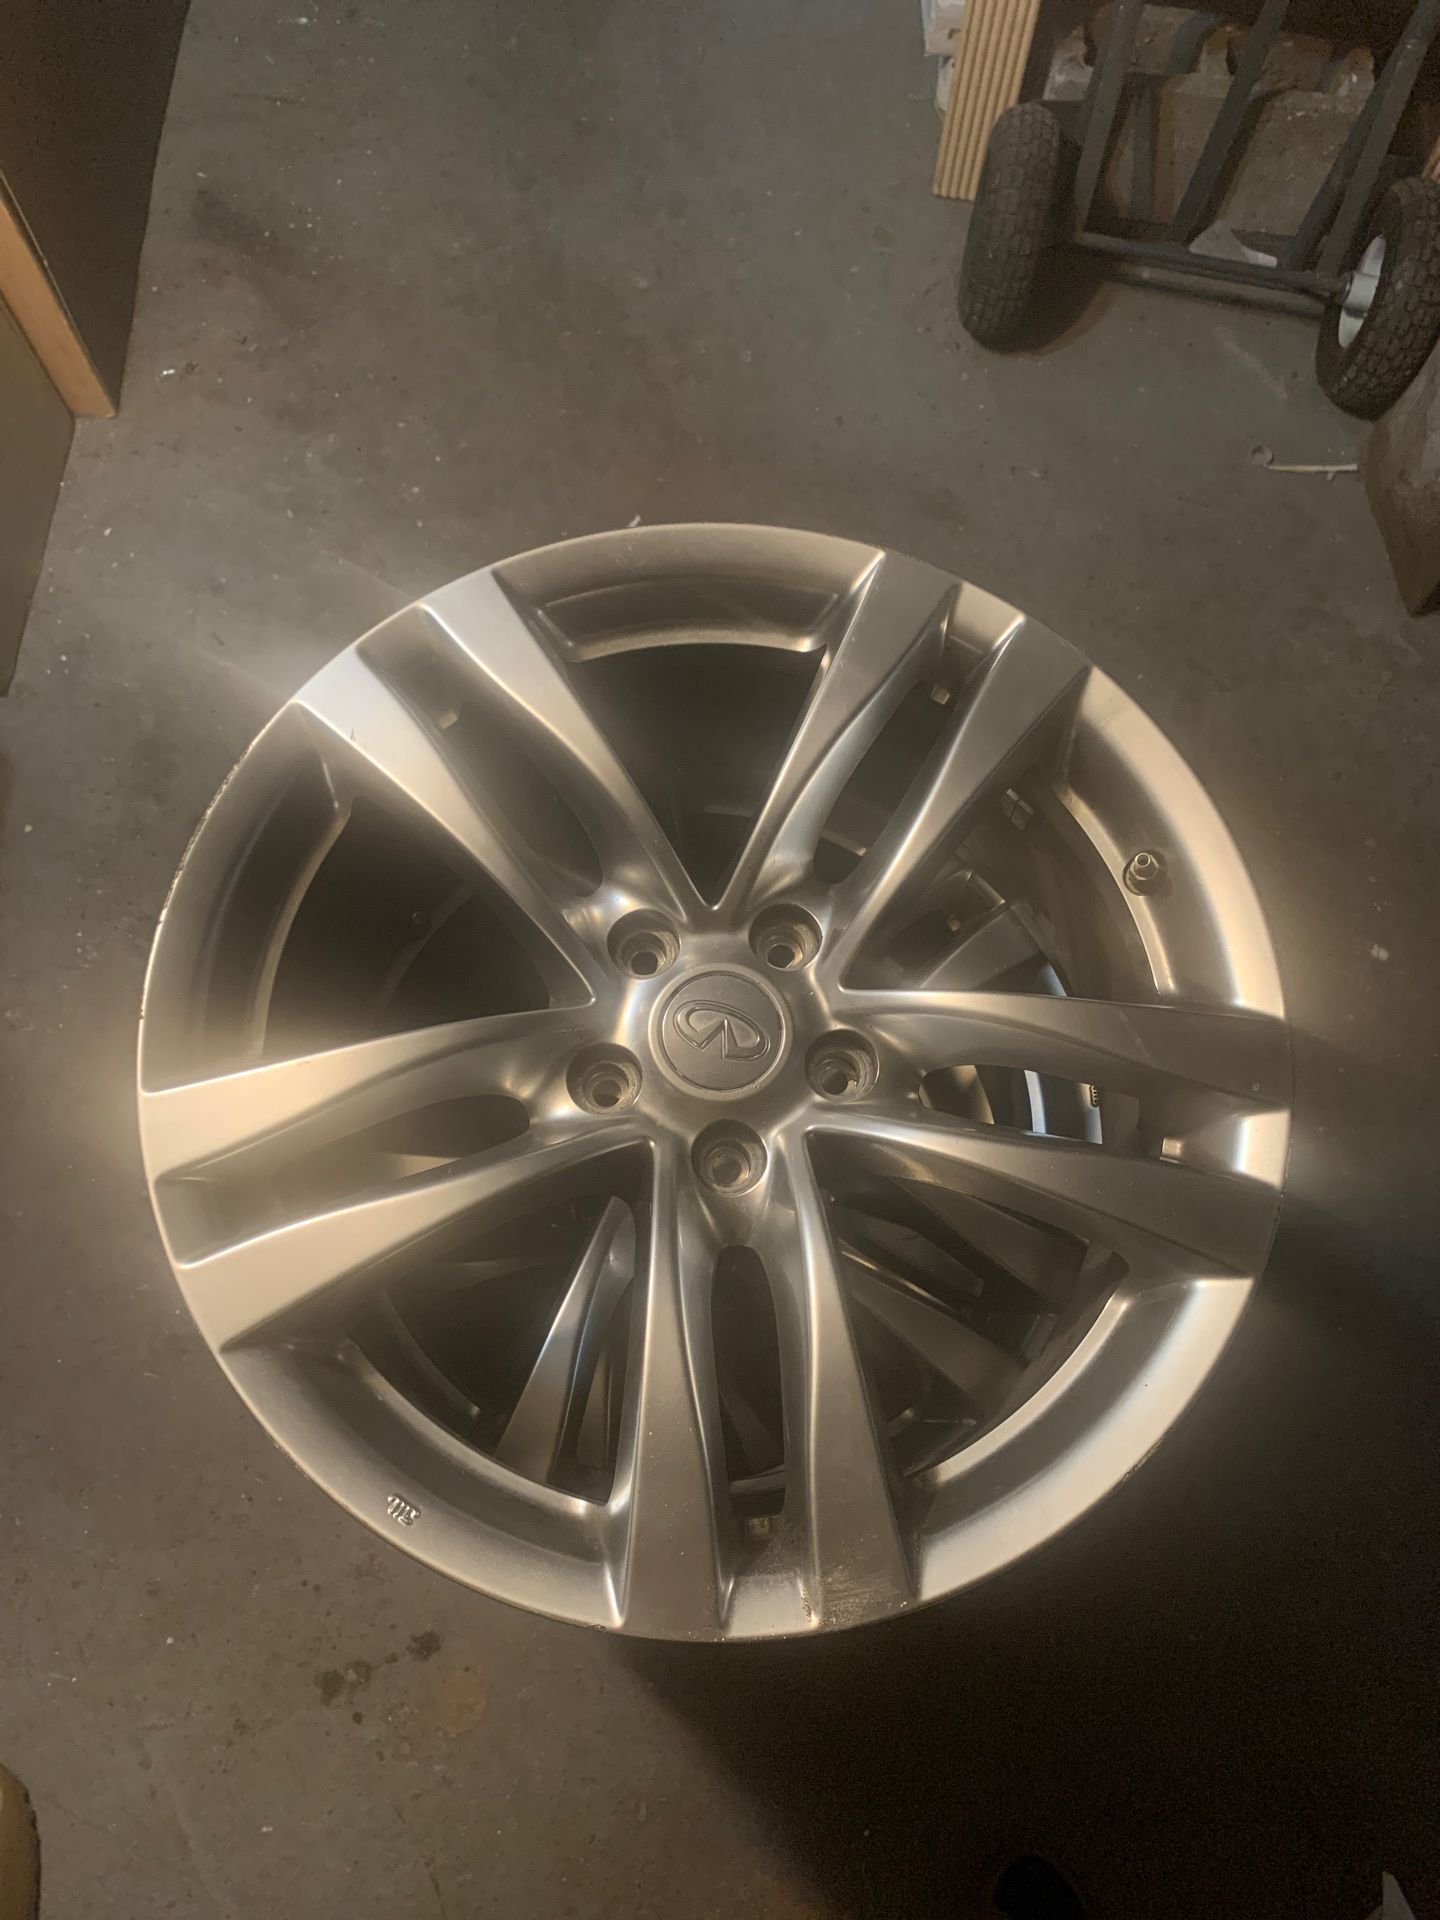 Infiniti rims for sale need them gone